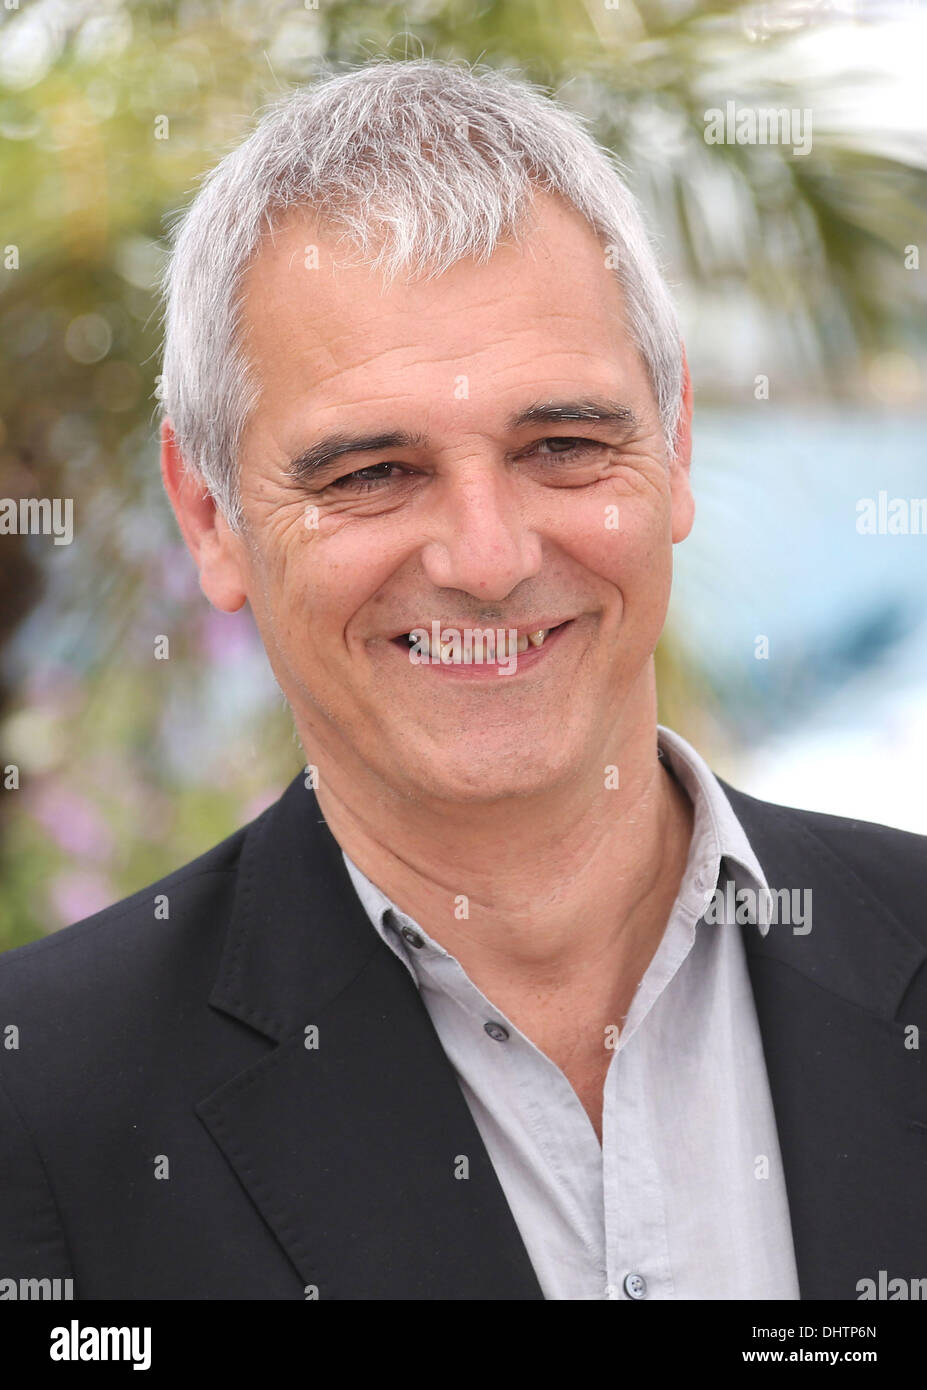 Laurent Cantet Photocall for '7 Dias En La Habana' (7 Days in Havana) during the 65th annual Cannes Film Festival Cannes, France - 23.05.12 Stock Photo